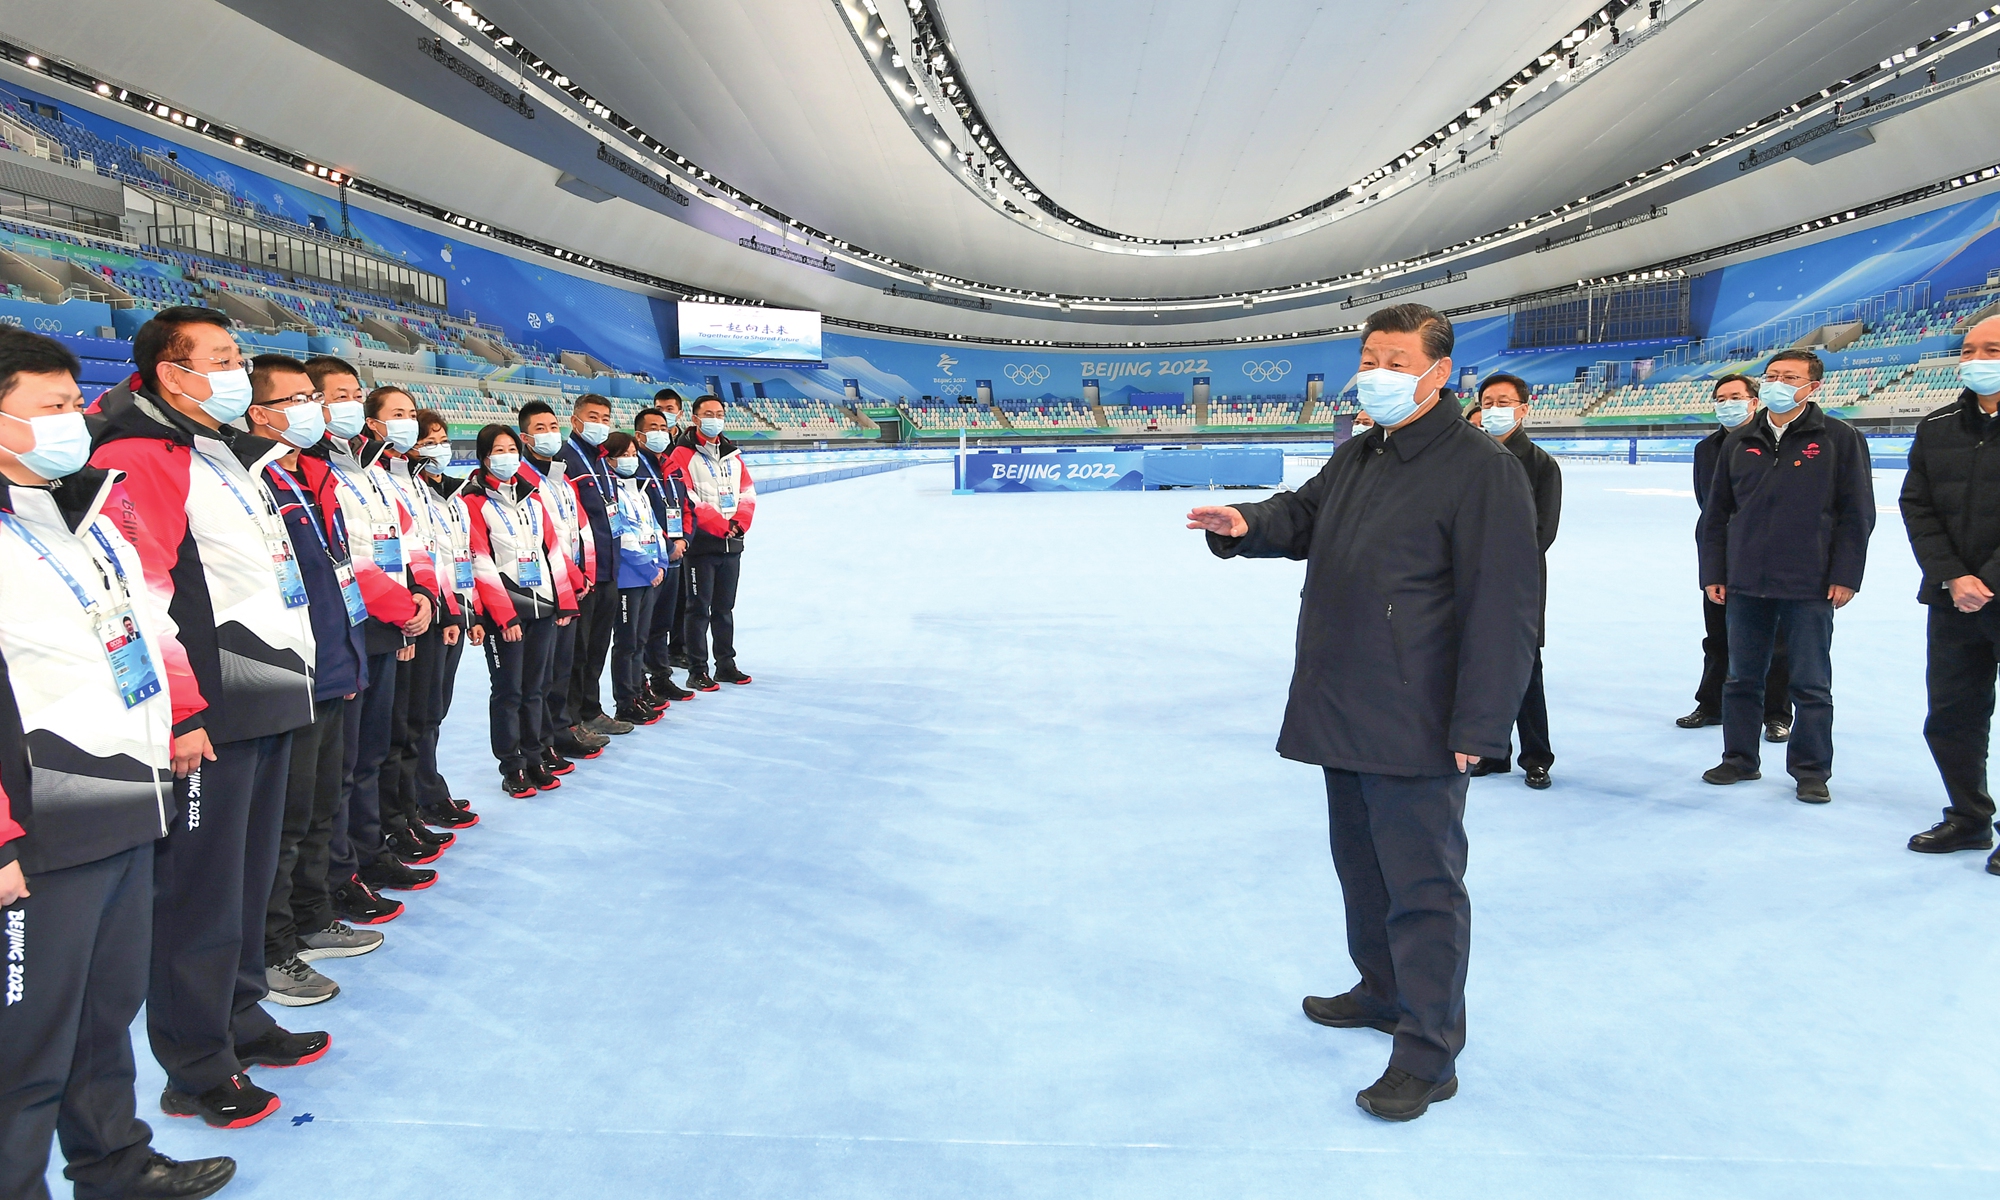 Chinese President Xi Jinping, also general secretary of the Communist Party of China Central Committee and chairman of the Central Military Commission, visits the National Speed Skating Oval in Beijing, capital of China, on January 4, 2022. Xi inspected the preparations for the 2022 Olympic and Paralympic Winter Games in Beijing on January 4, 2022. Photo: Xinhua